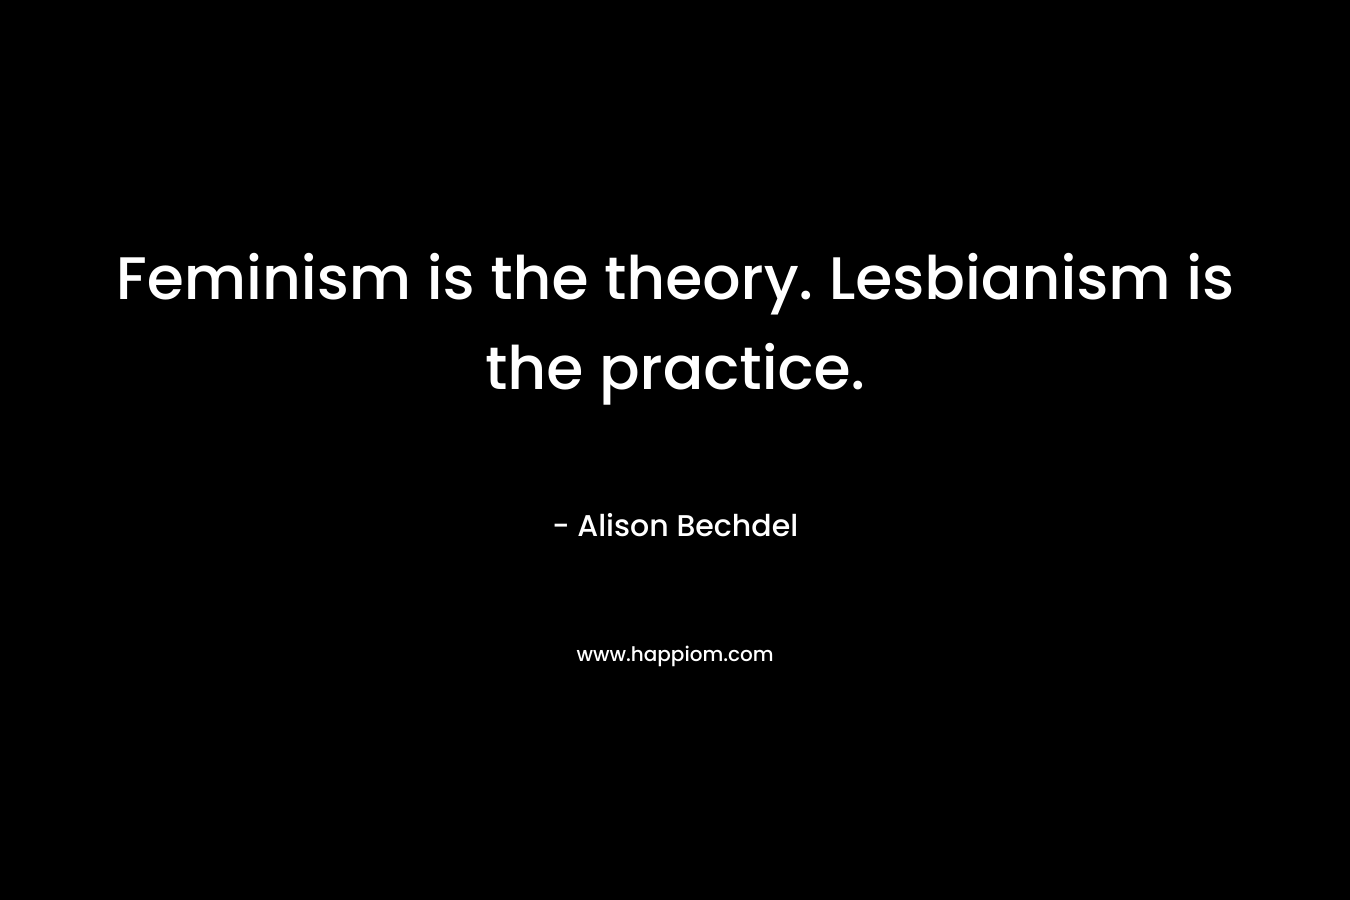 Feminism is the theory. Lesbianism is the practice.